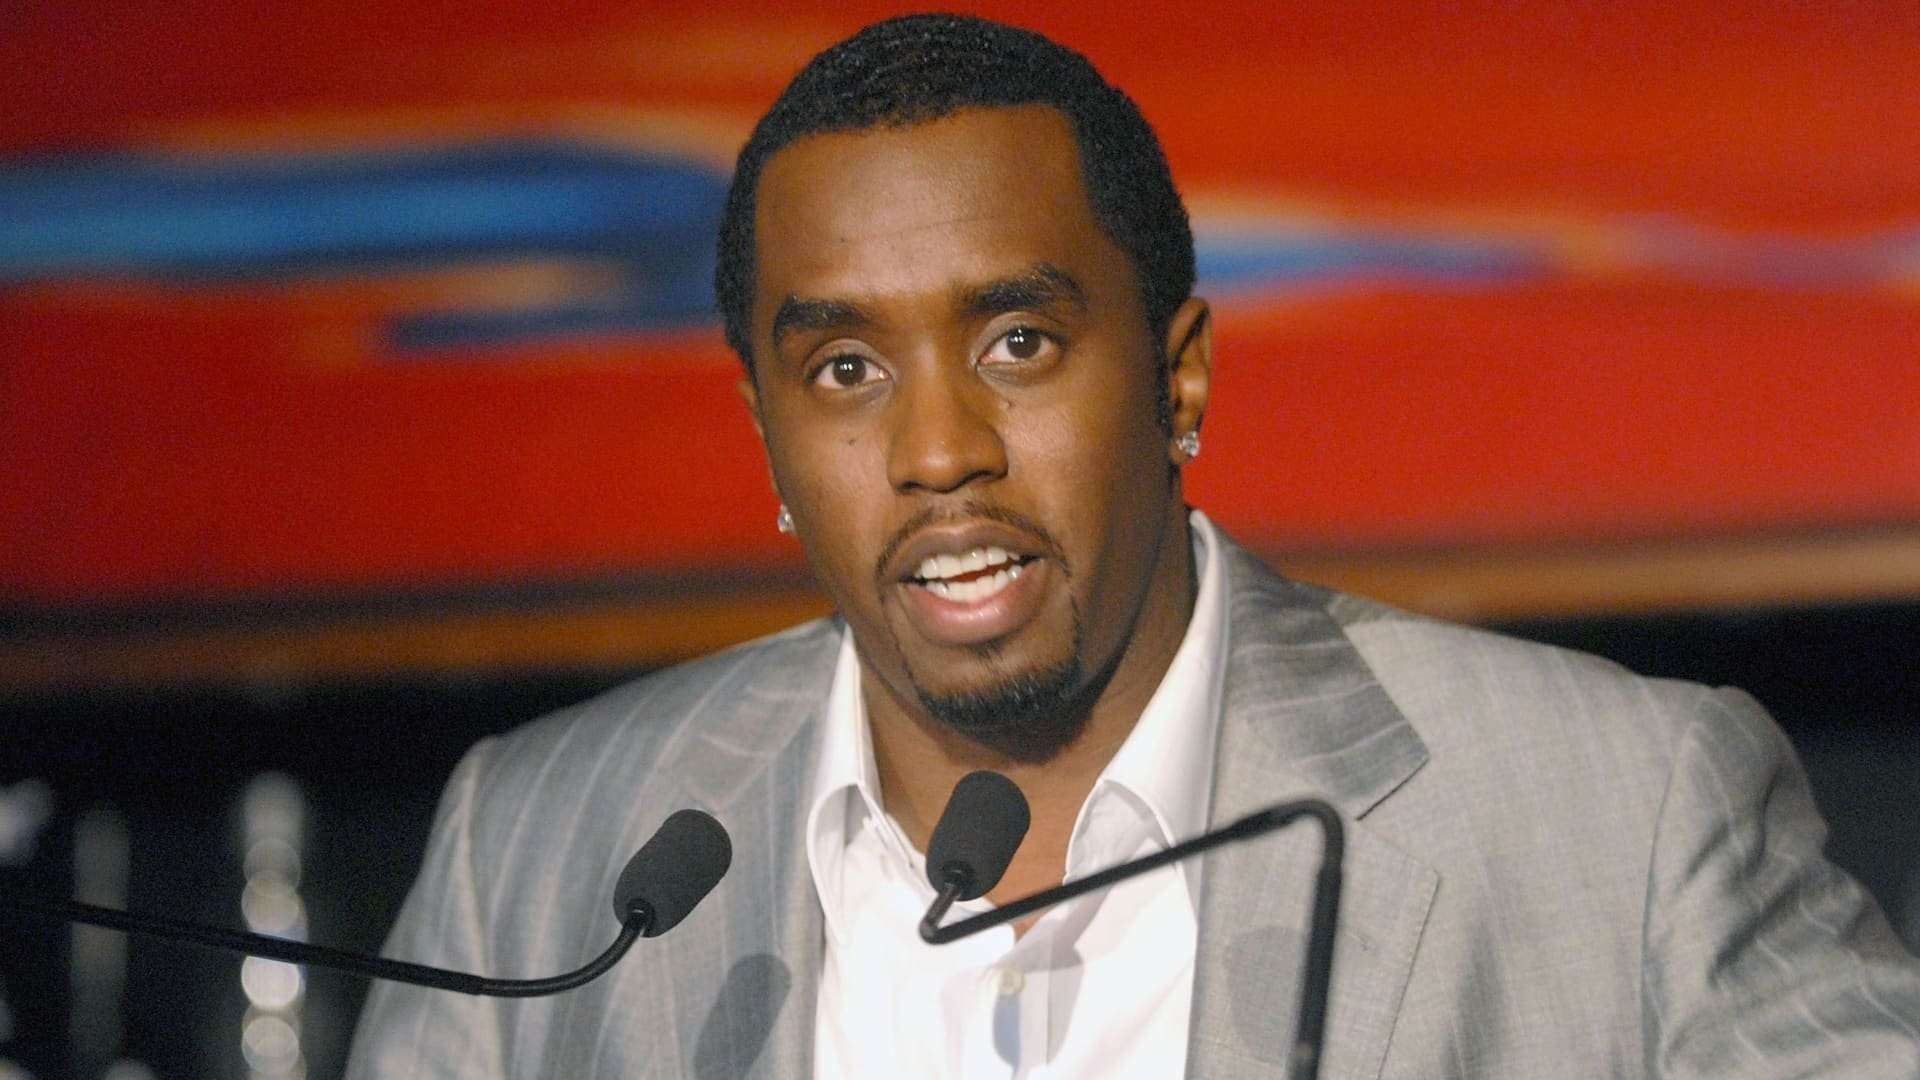 image for Music mogul Sean 'Diddy' Combs sued for alleged rape, sex trafficking by singer Cassie